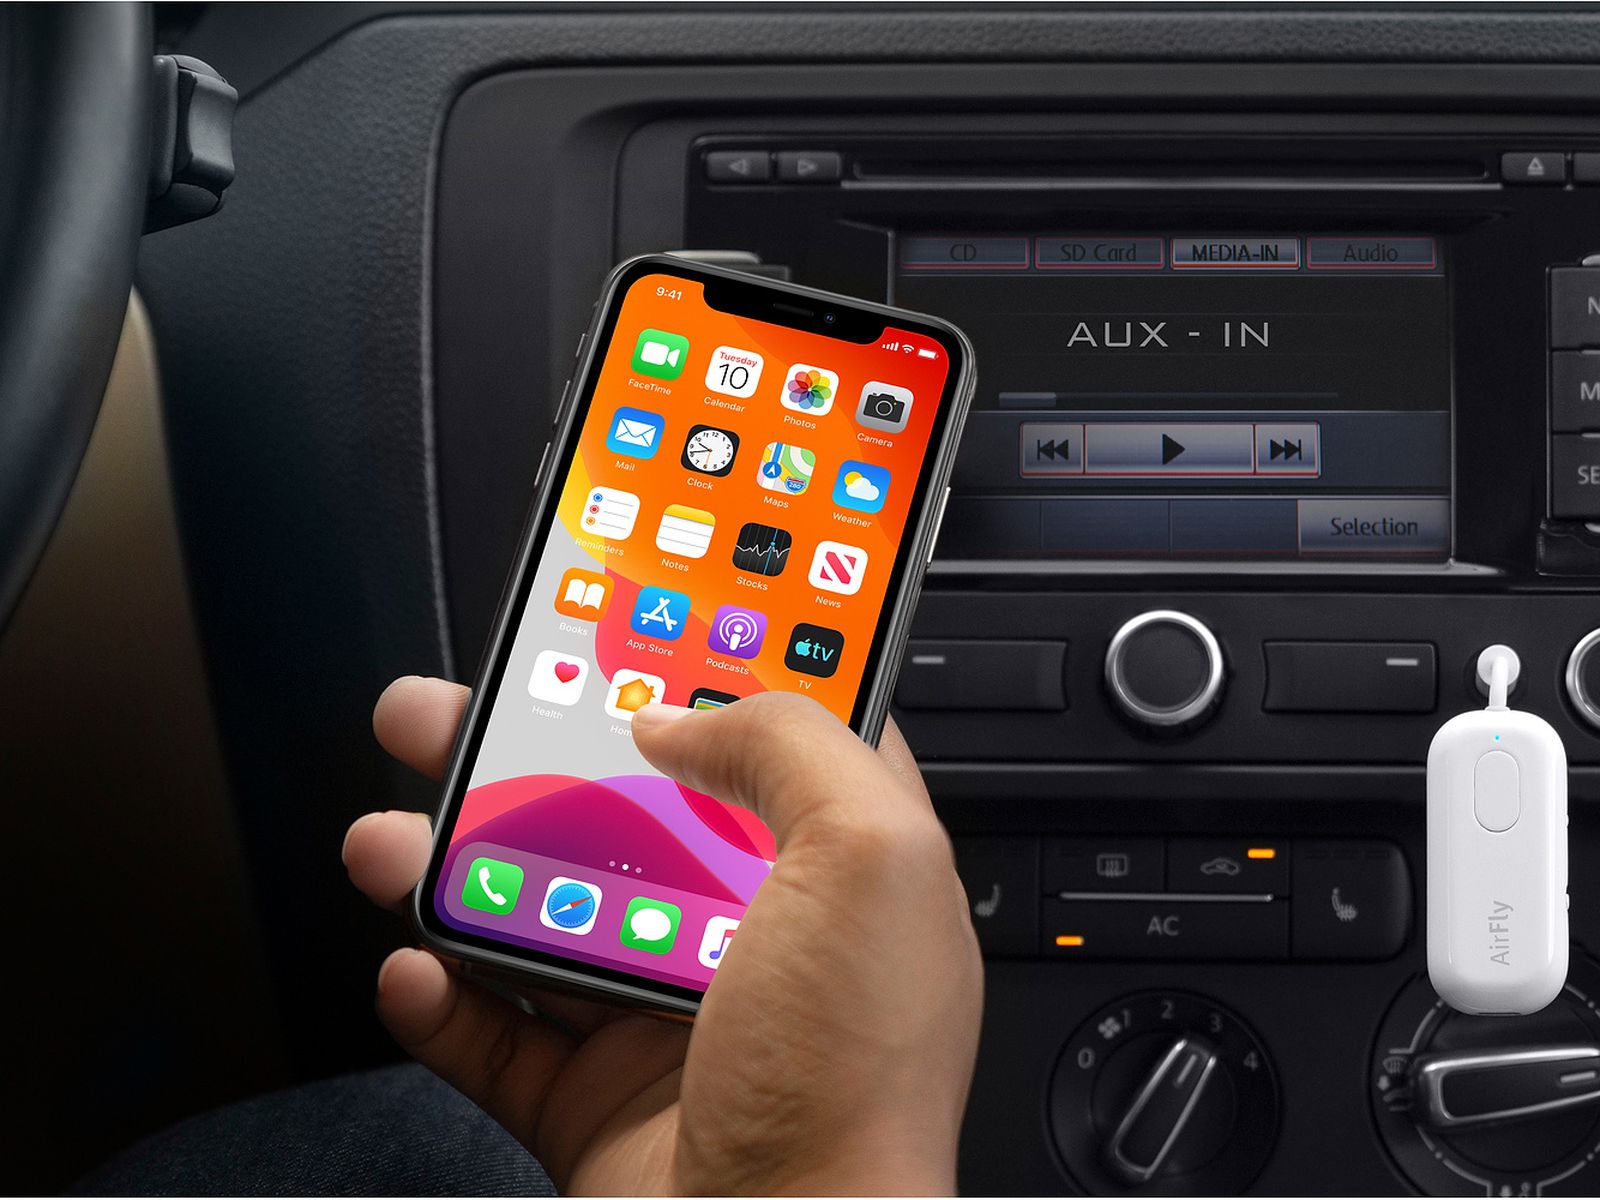 distress skirmish in the meantime AirFly Pro Launches at Apple Stores With Receiver Mode for AUX Ports,  Headphone Splitting, and More - MacRumors